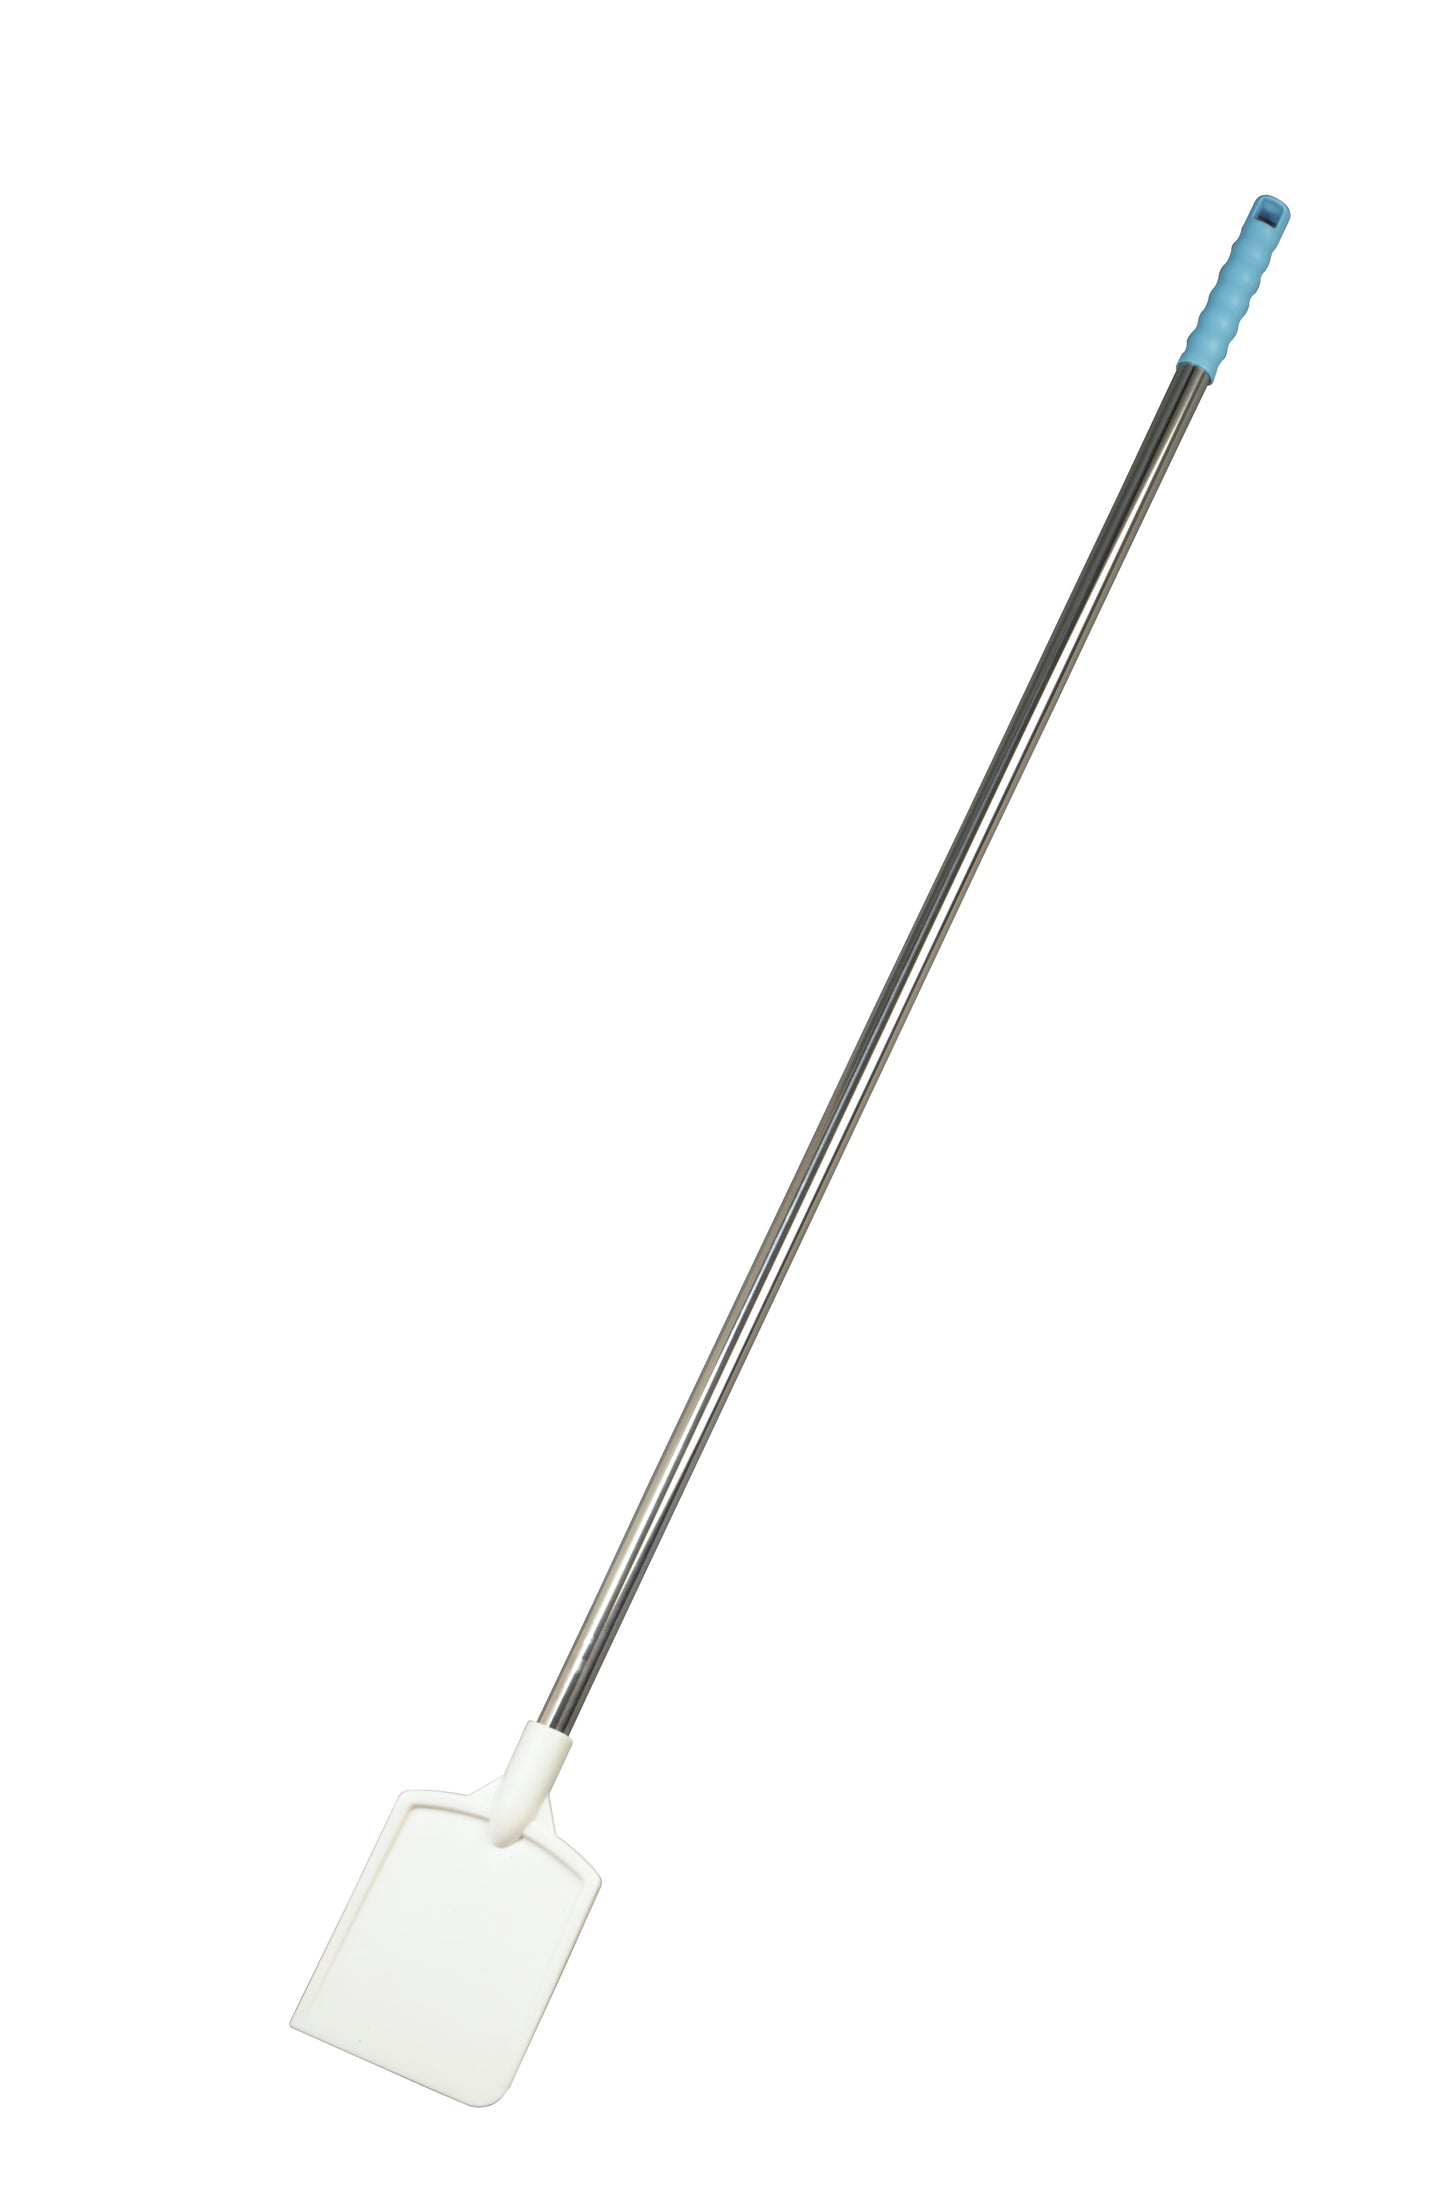 200mm Polyester Paddle with Stainless Steel Handle and Polypropylene Grip (PADL3)